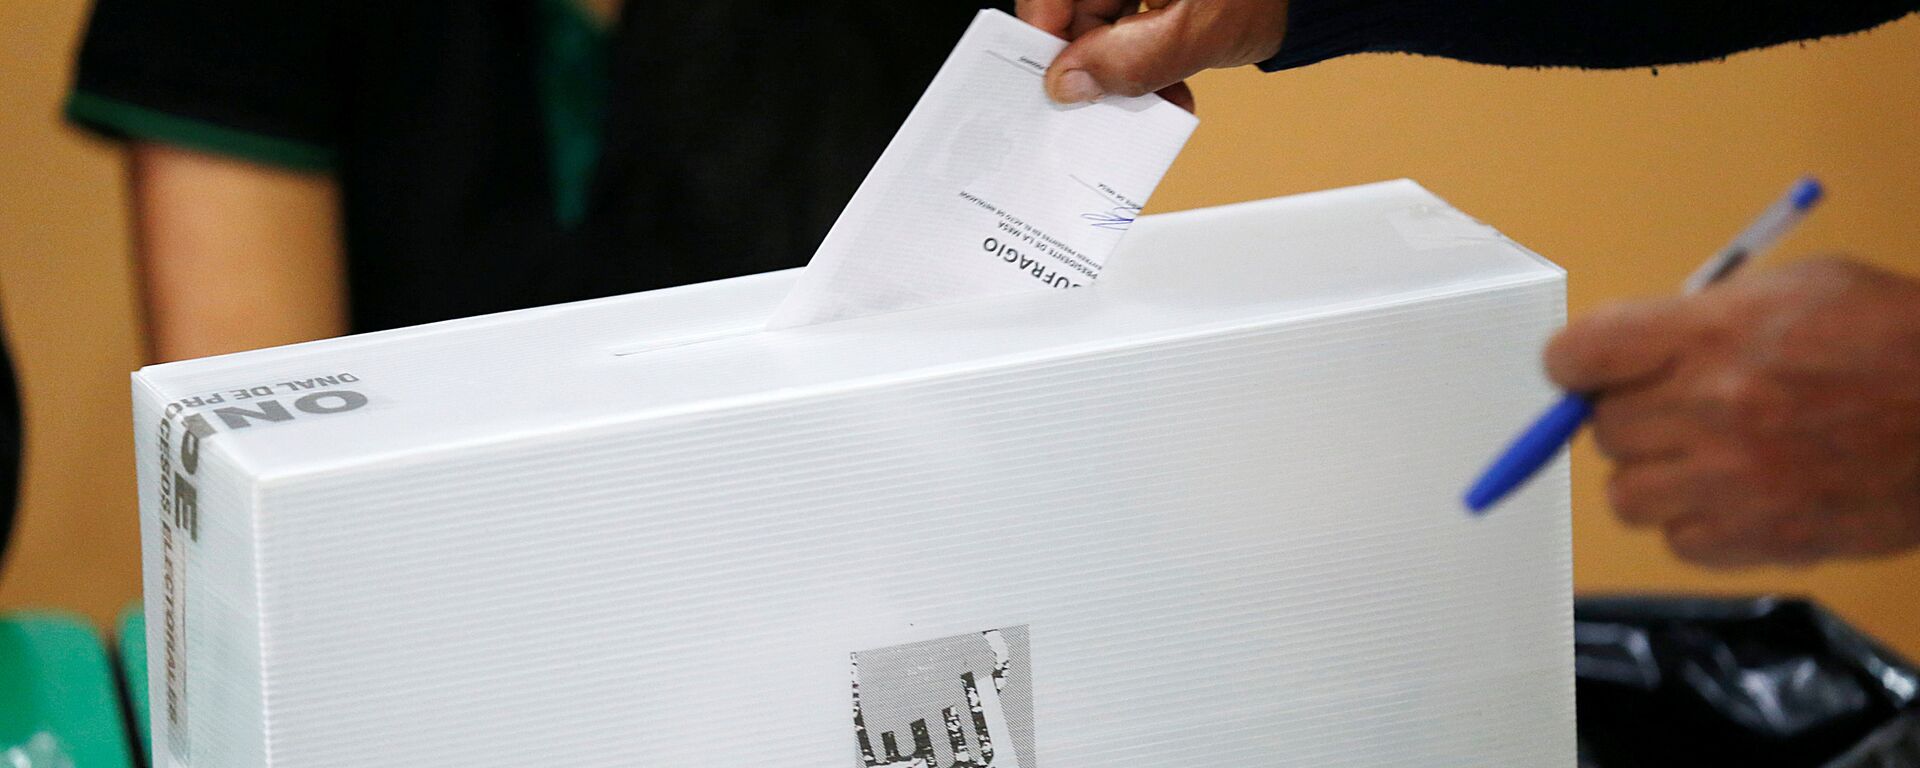 A man casts his ballot in Peru's presidential election at a voting station in Lima, Peru - Sputnik Mundo, 1920, 28.12.2020